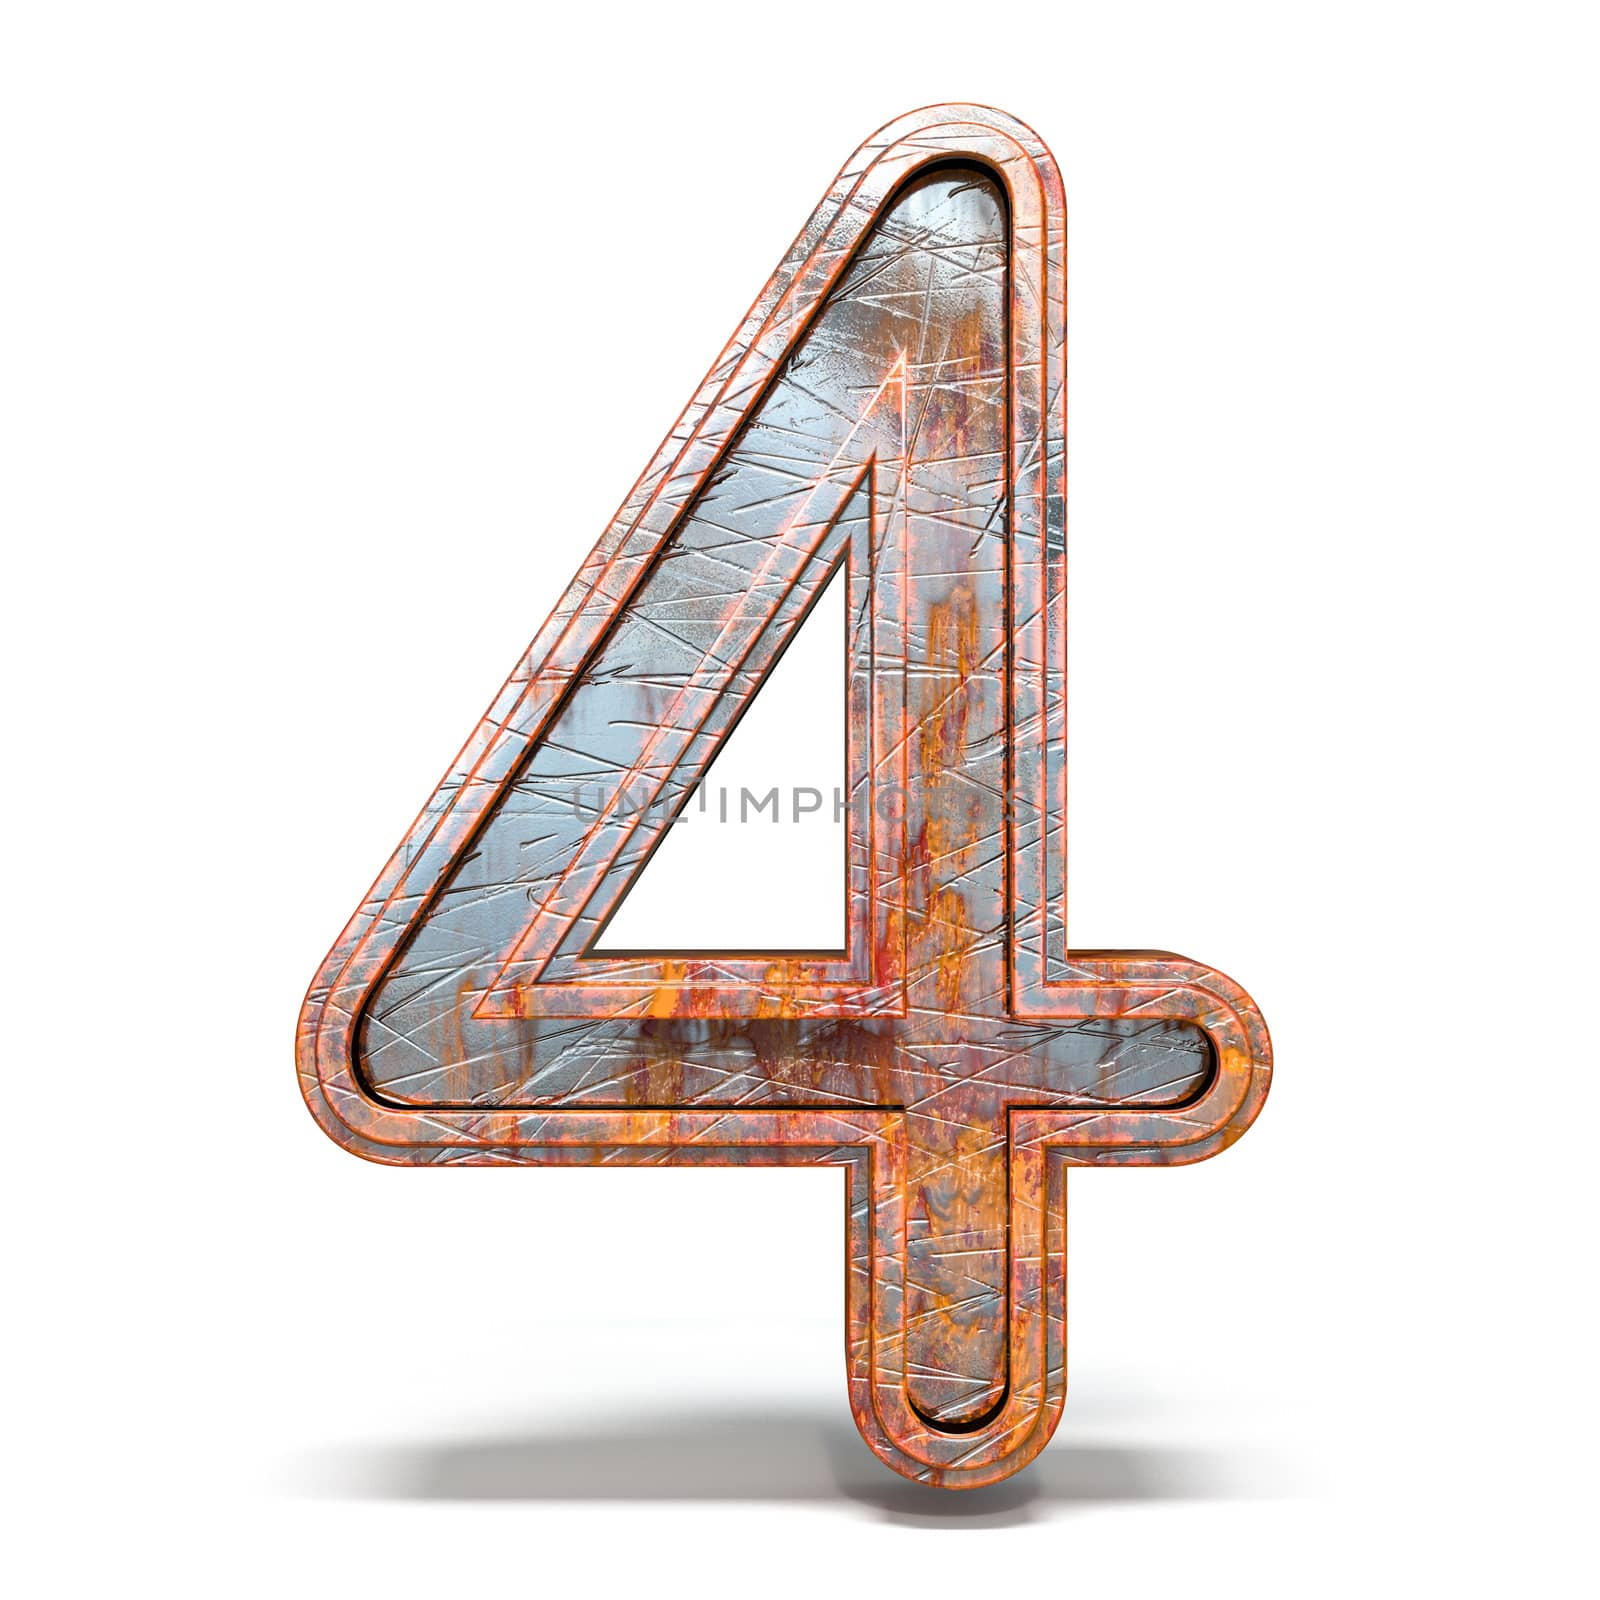 Rusty metal font Number 4 FOUR 3D render illustration isolated on white background